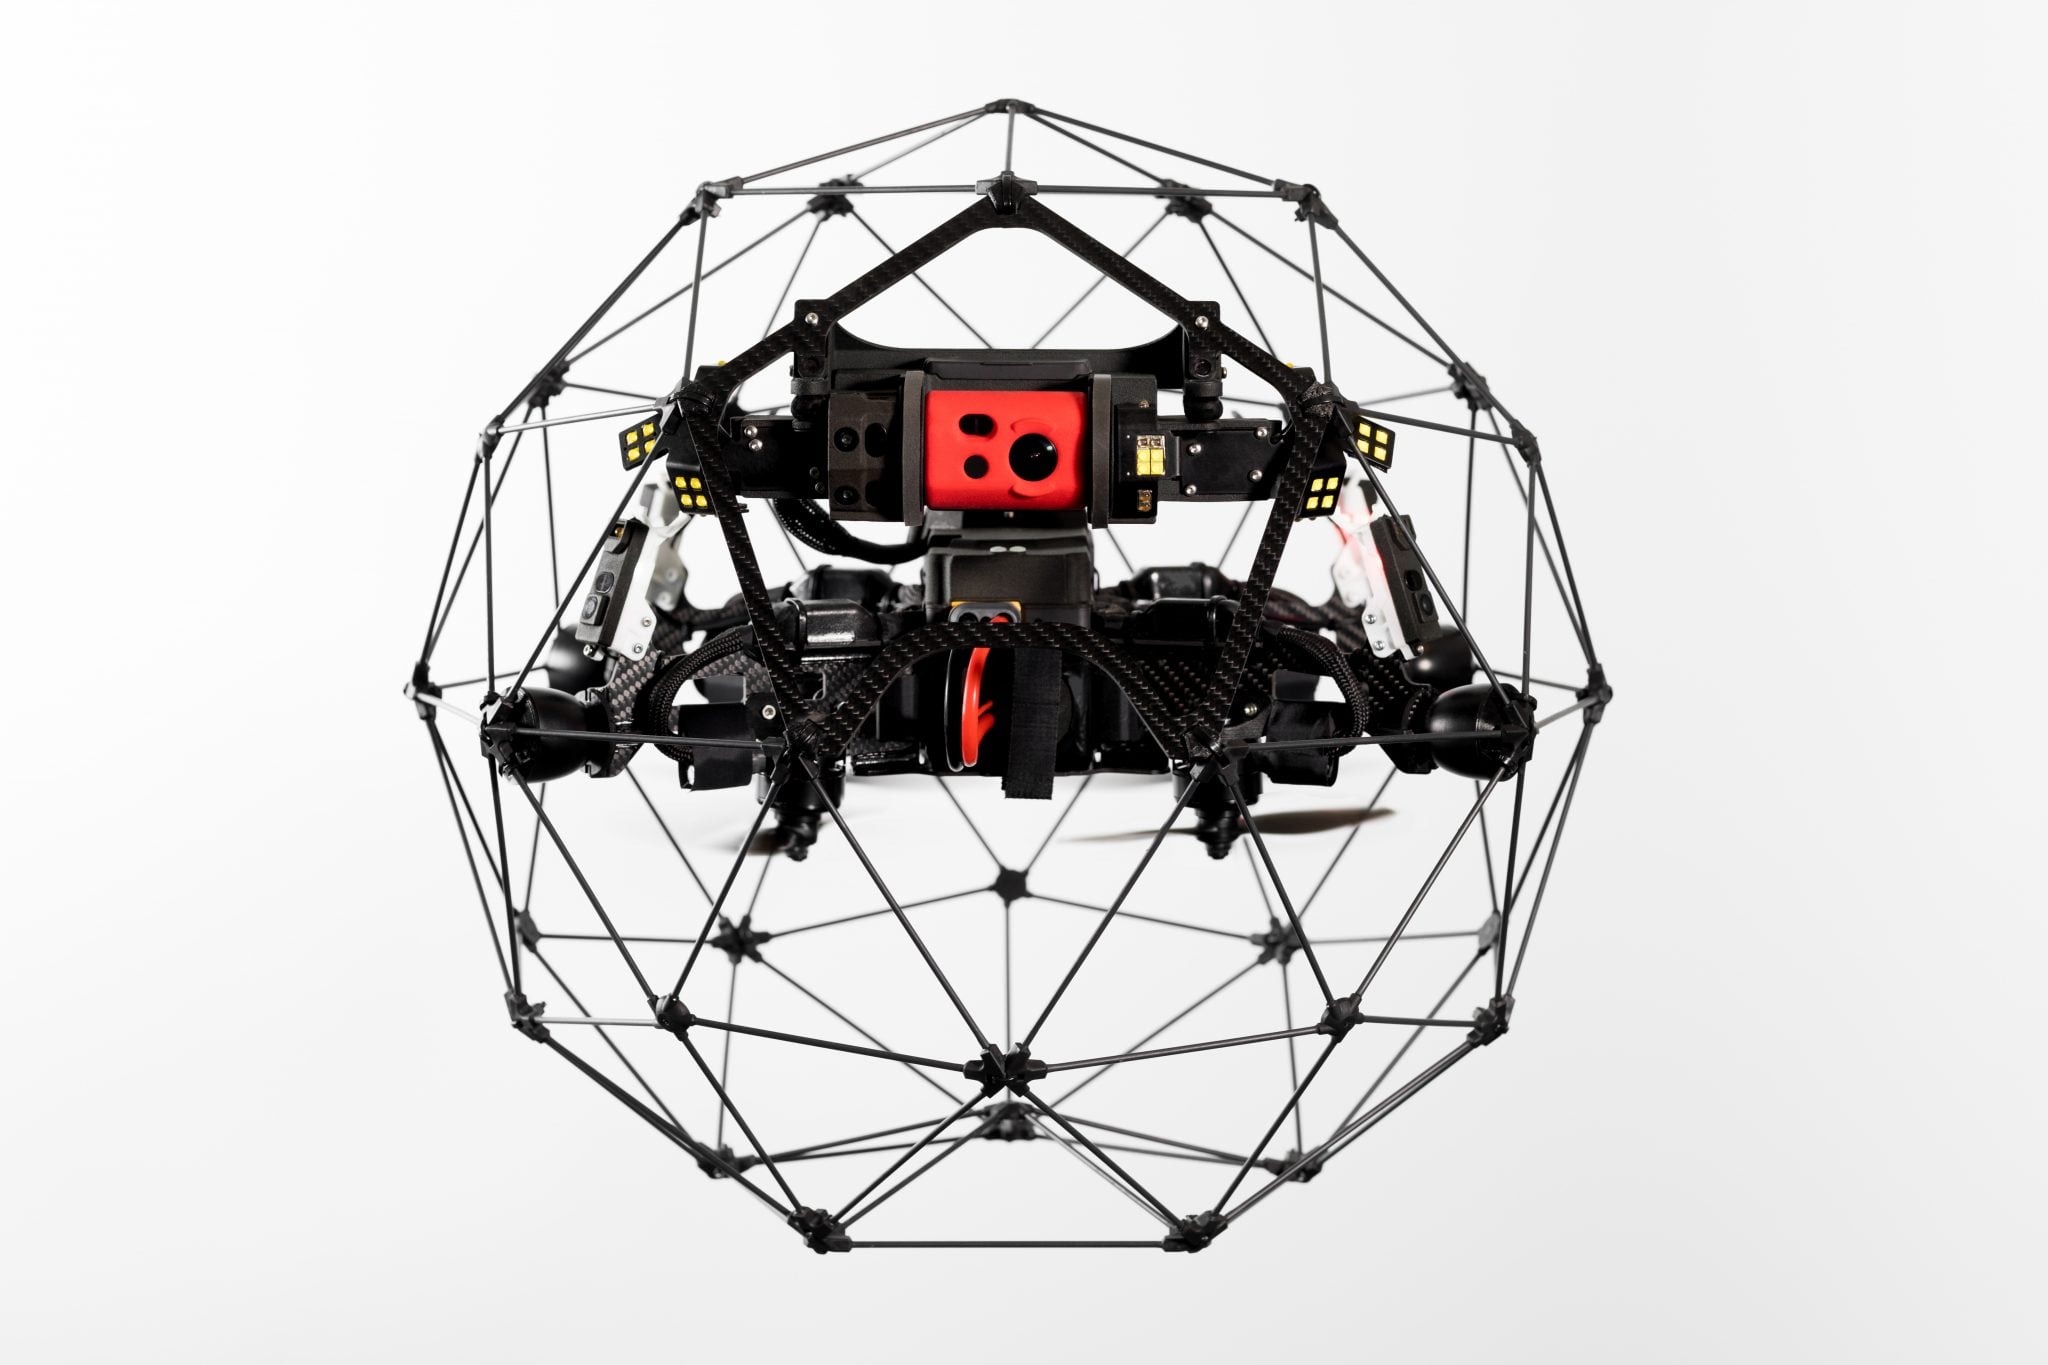 Elios 2 is the most intuitive, reliable, and precise indoor inspection drone.